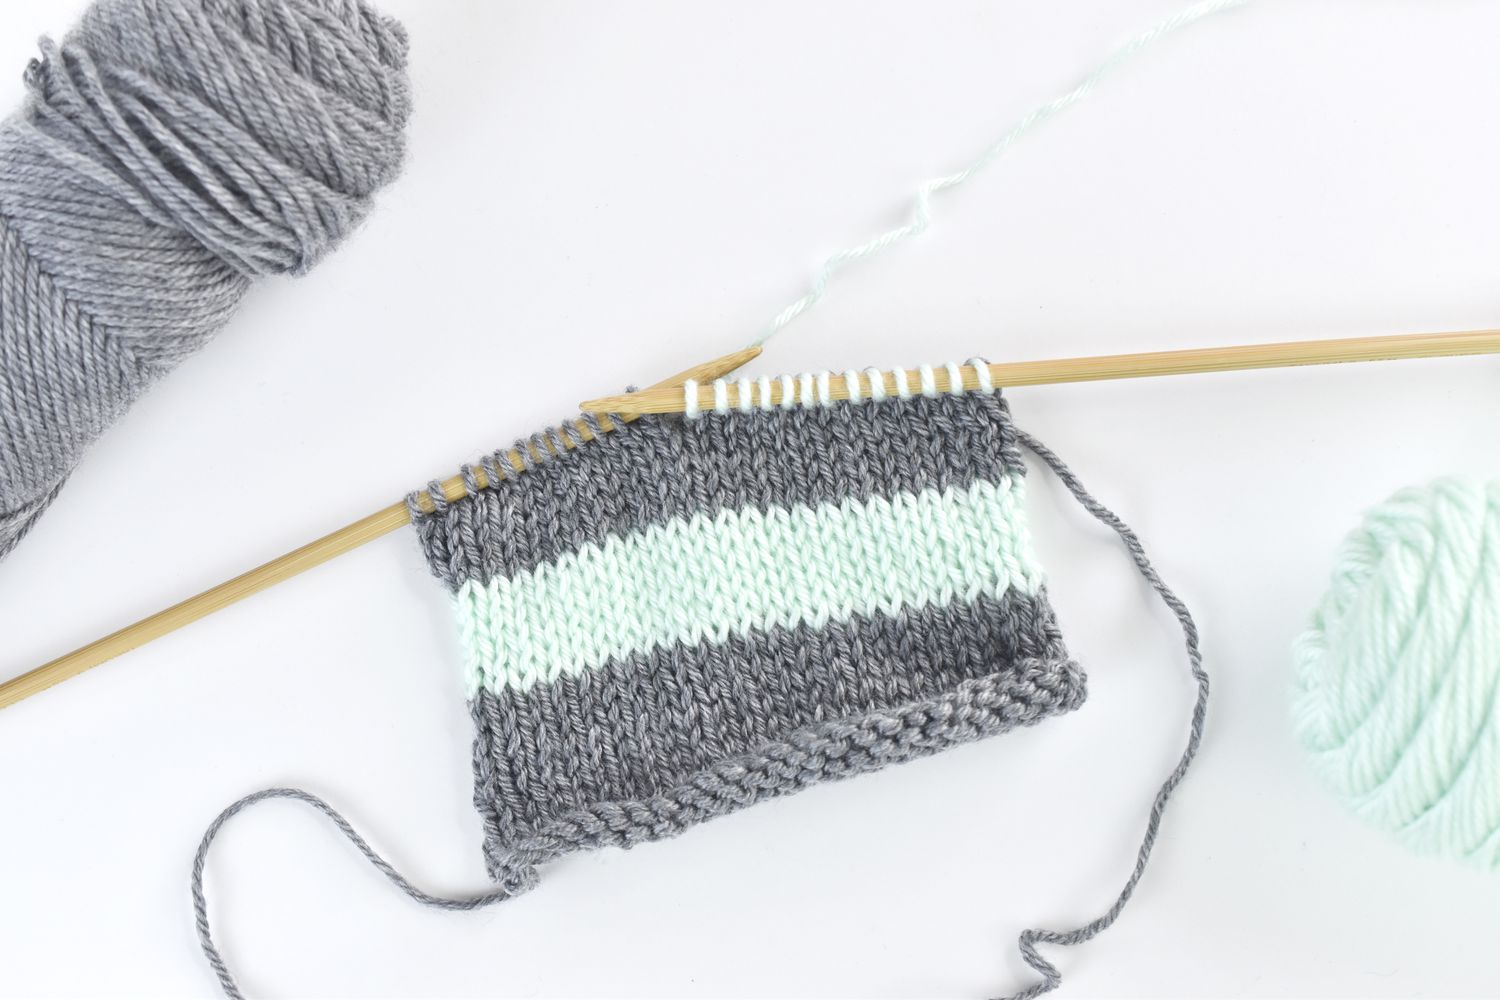 How to Change Colors When Knitting